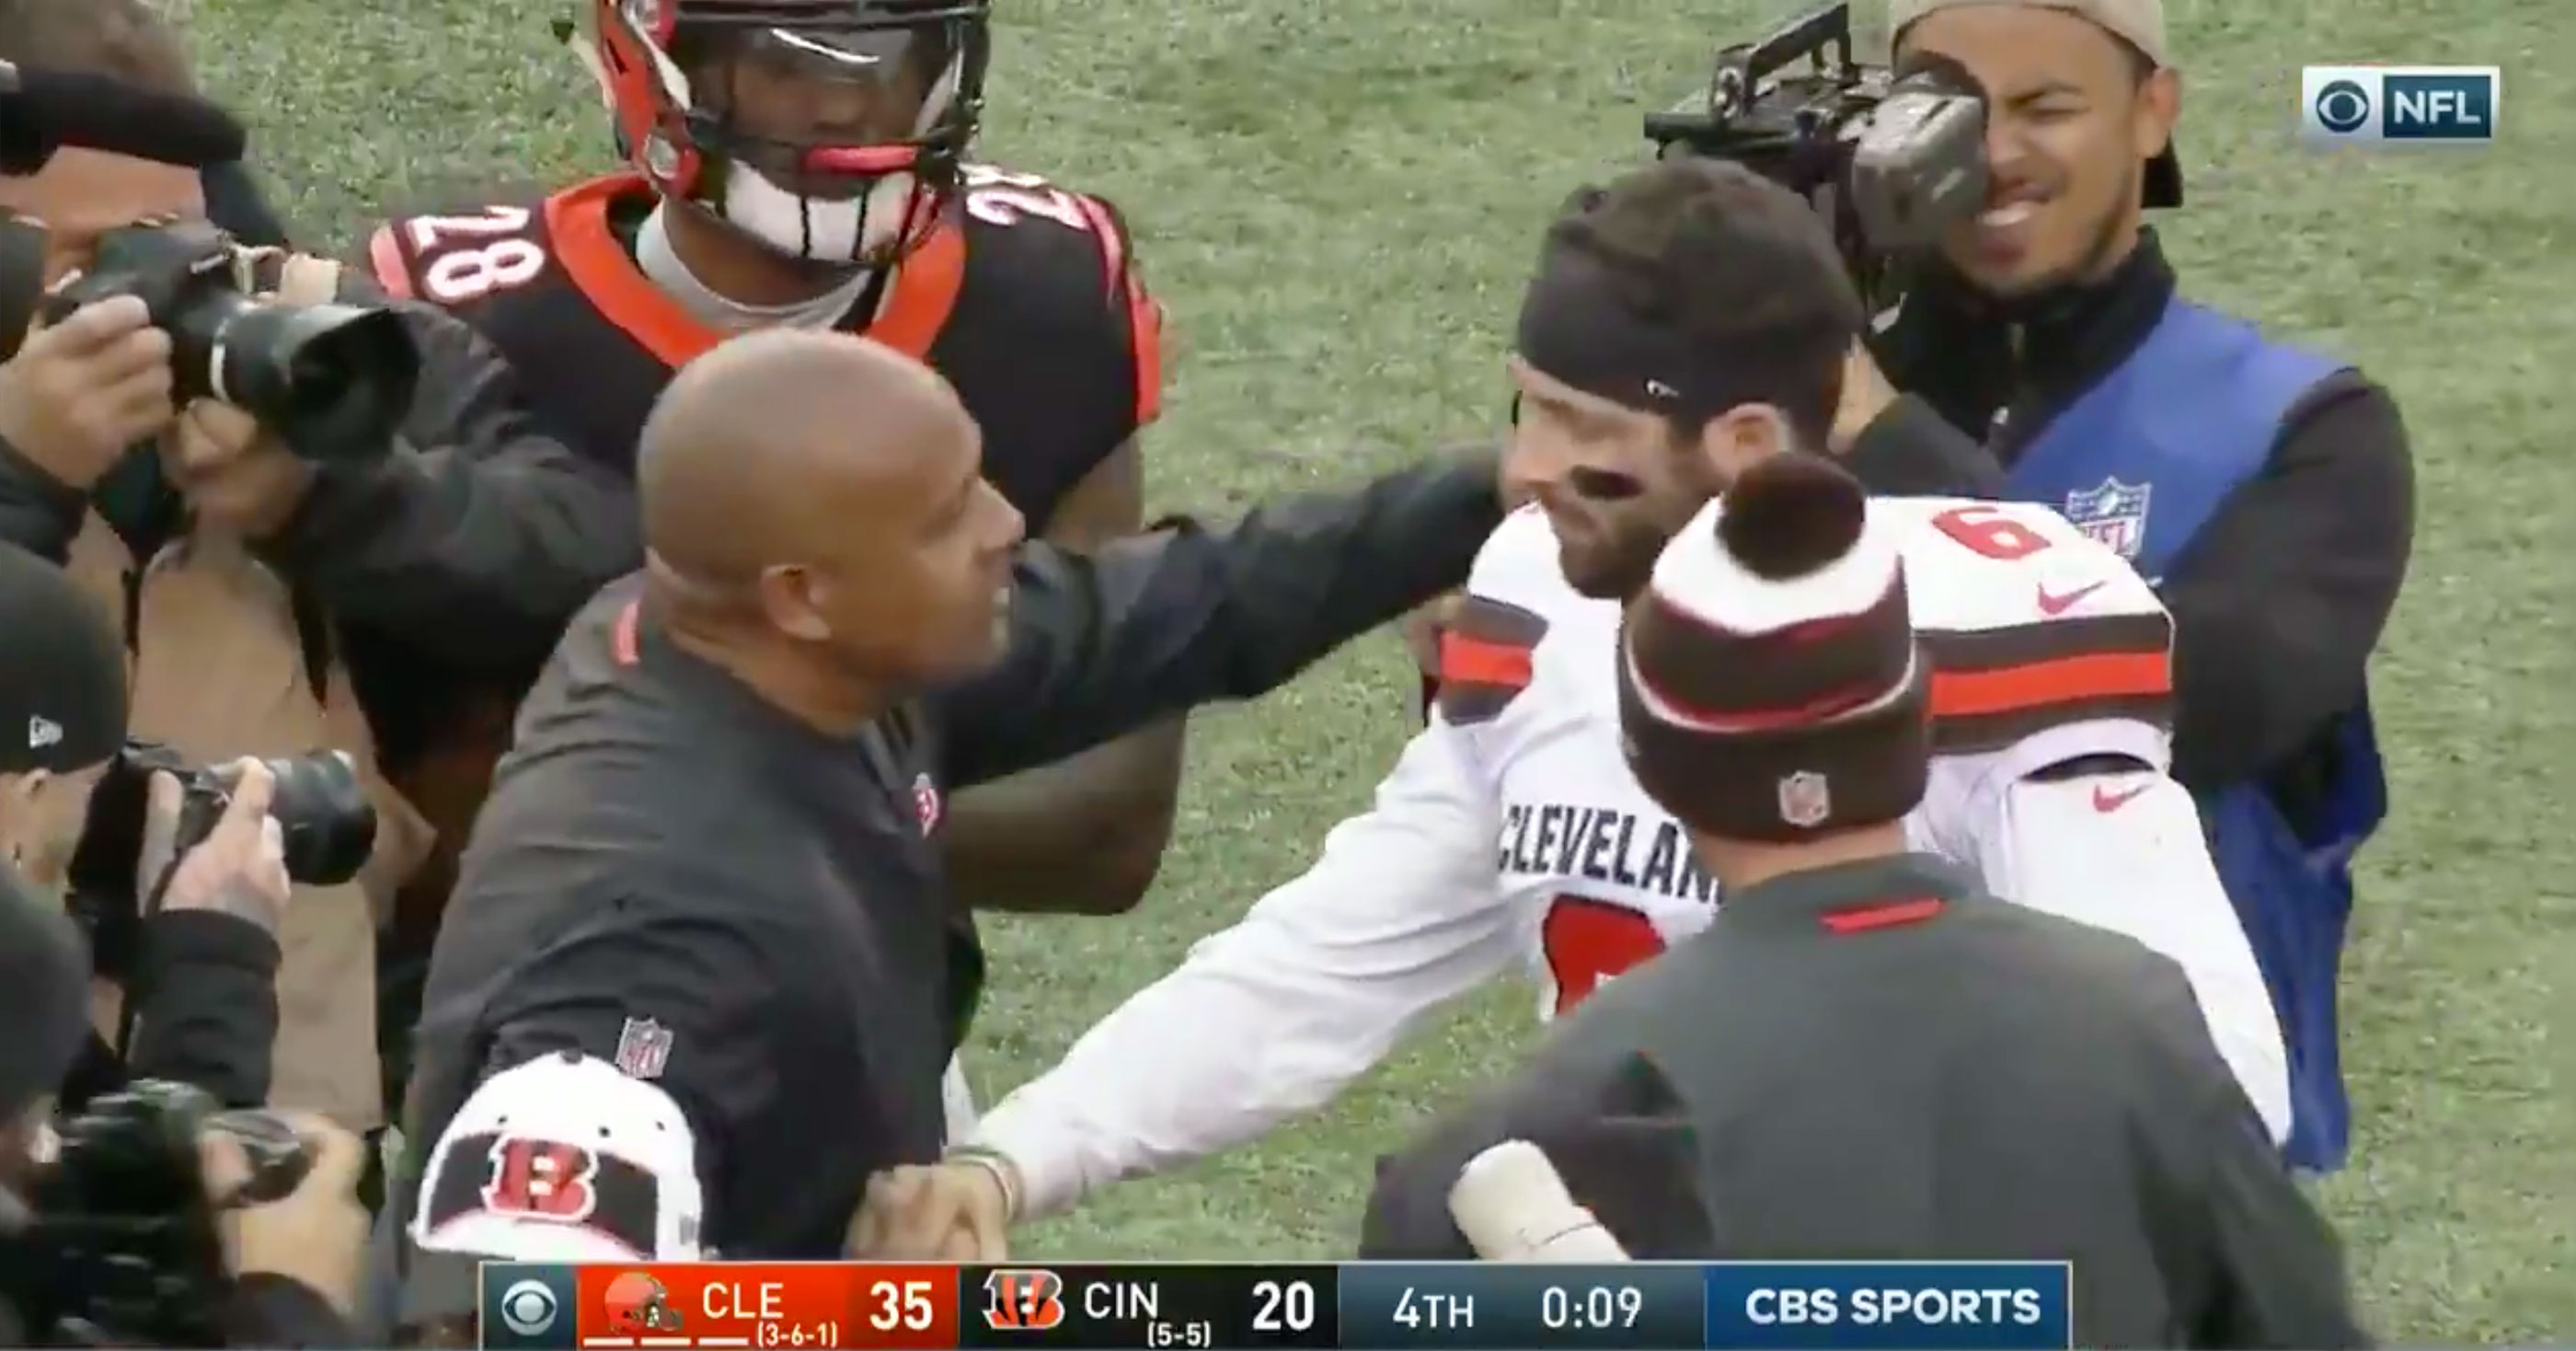 Baker Mayfield Denies Hug From His Former Coach Hue Jackson During Postgame Handshakes2800 x 1468